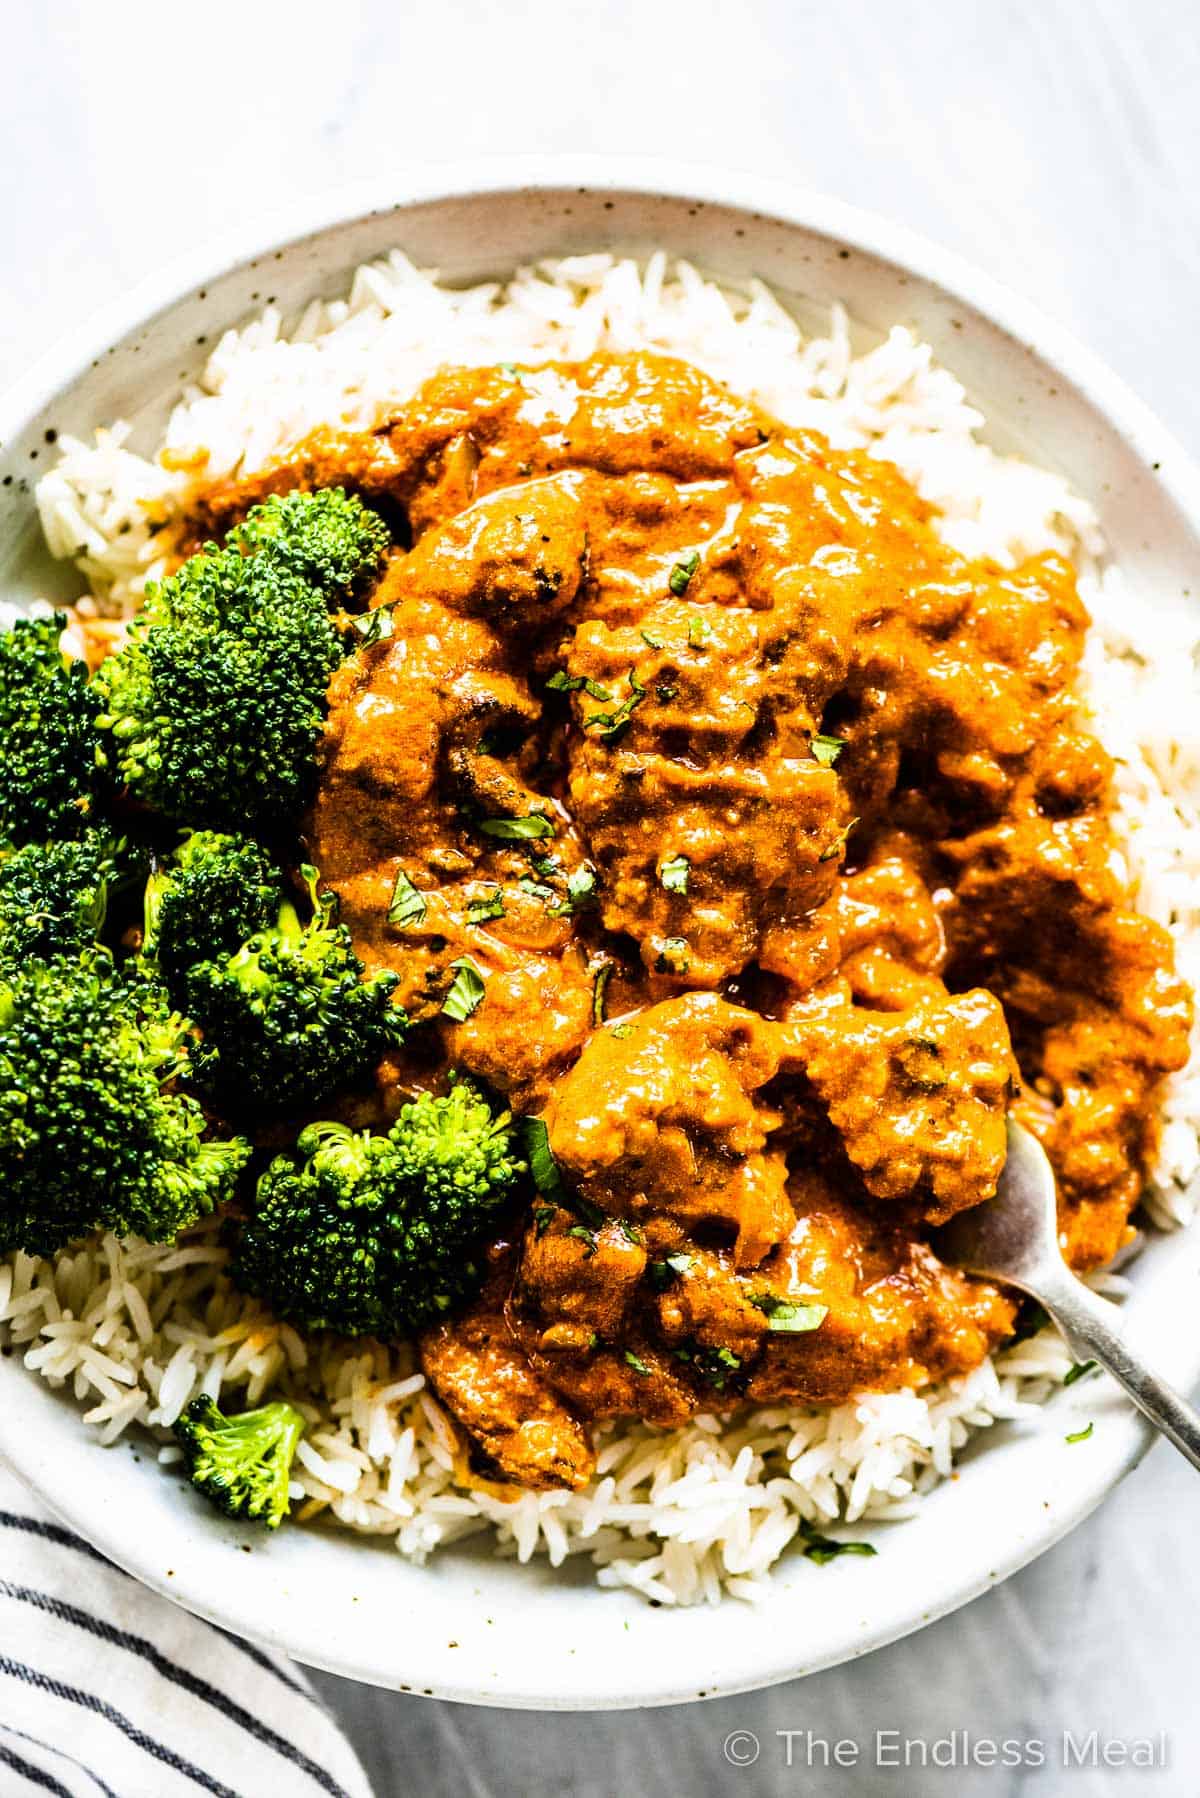 Chicken tikka masala on a plate with a side of rice and broccoli.